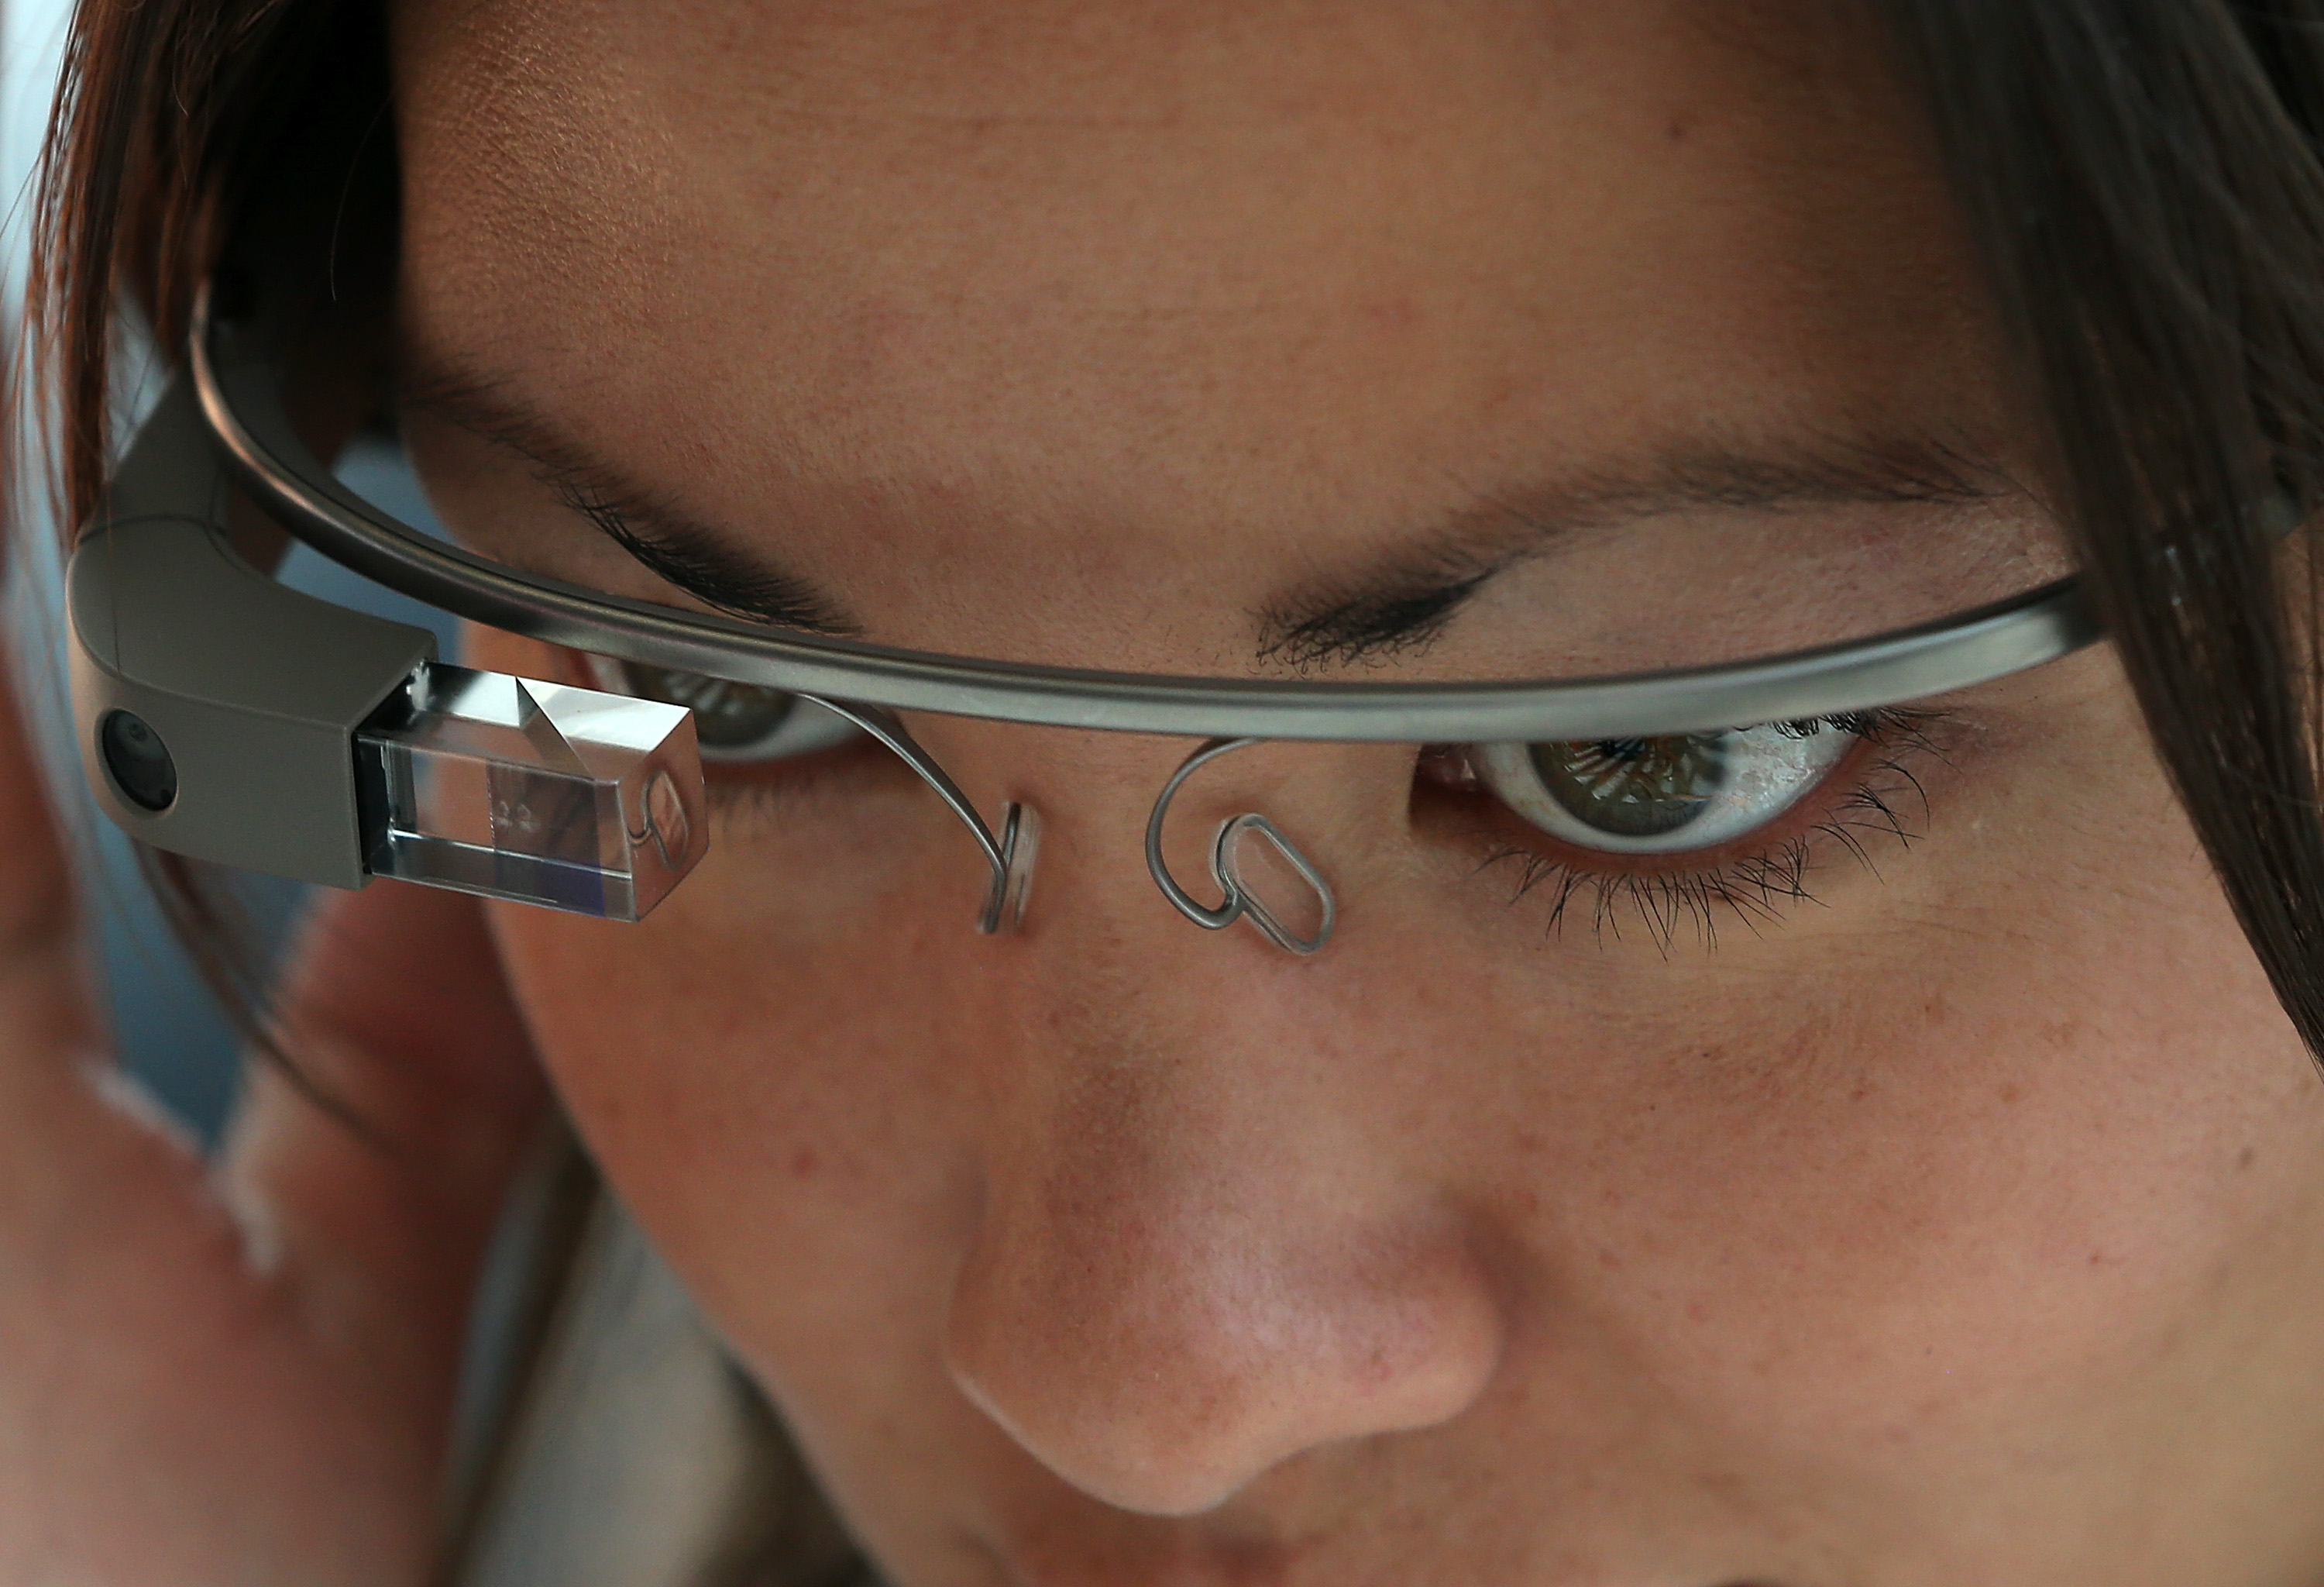 An attendee tries Google Glass during the Google I/O developer conference on May 17, 2013 in San Francisco, California. (Justin Sullivan&mdash;Getty Images)